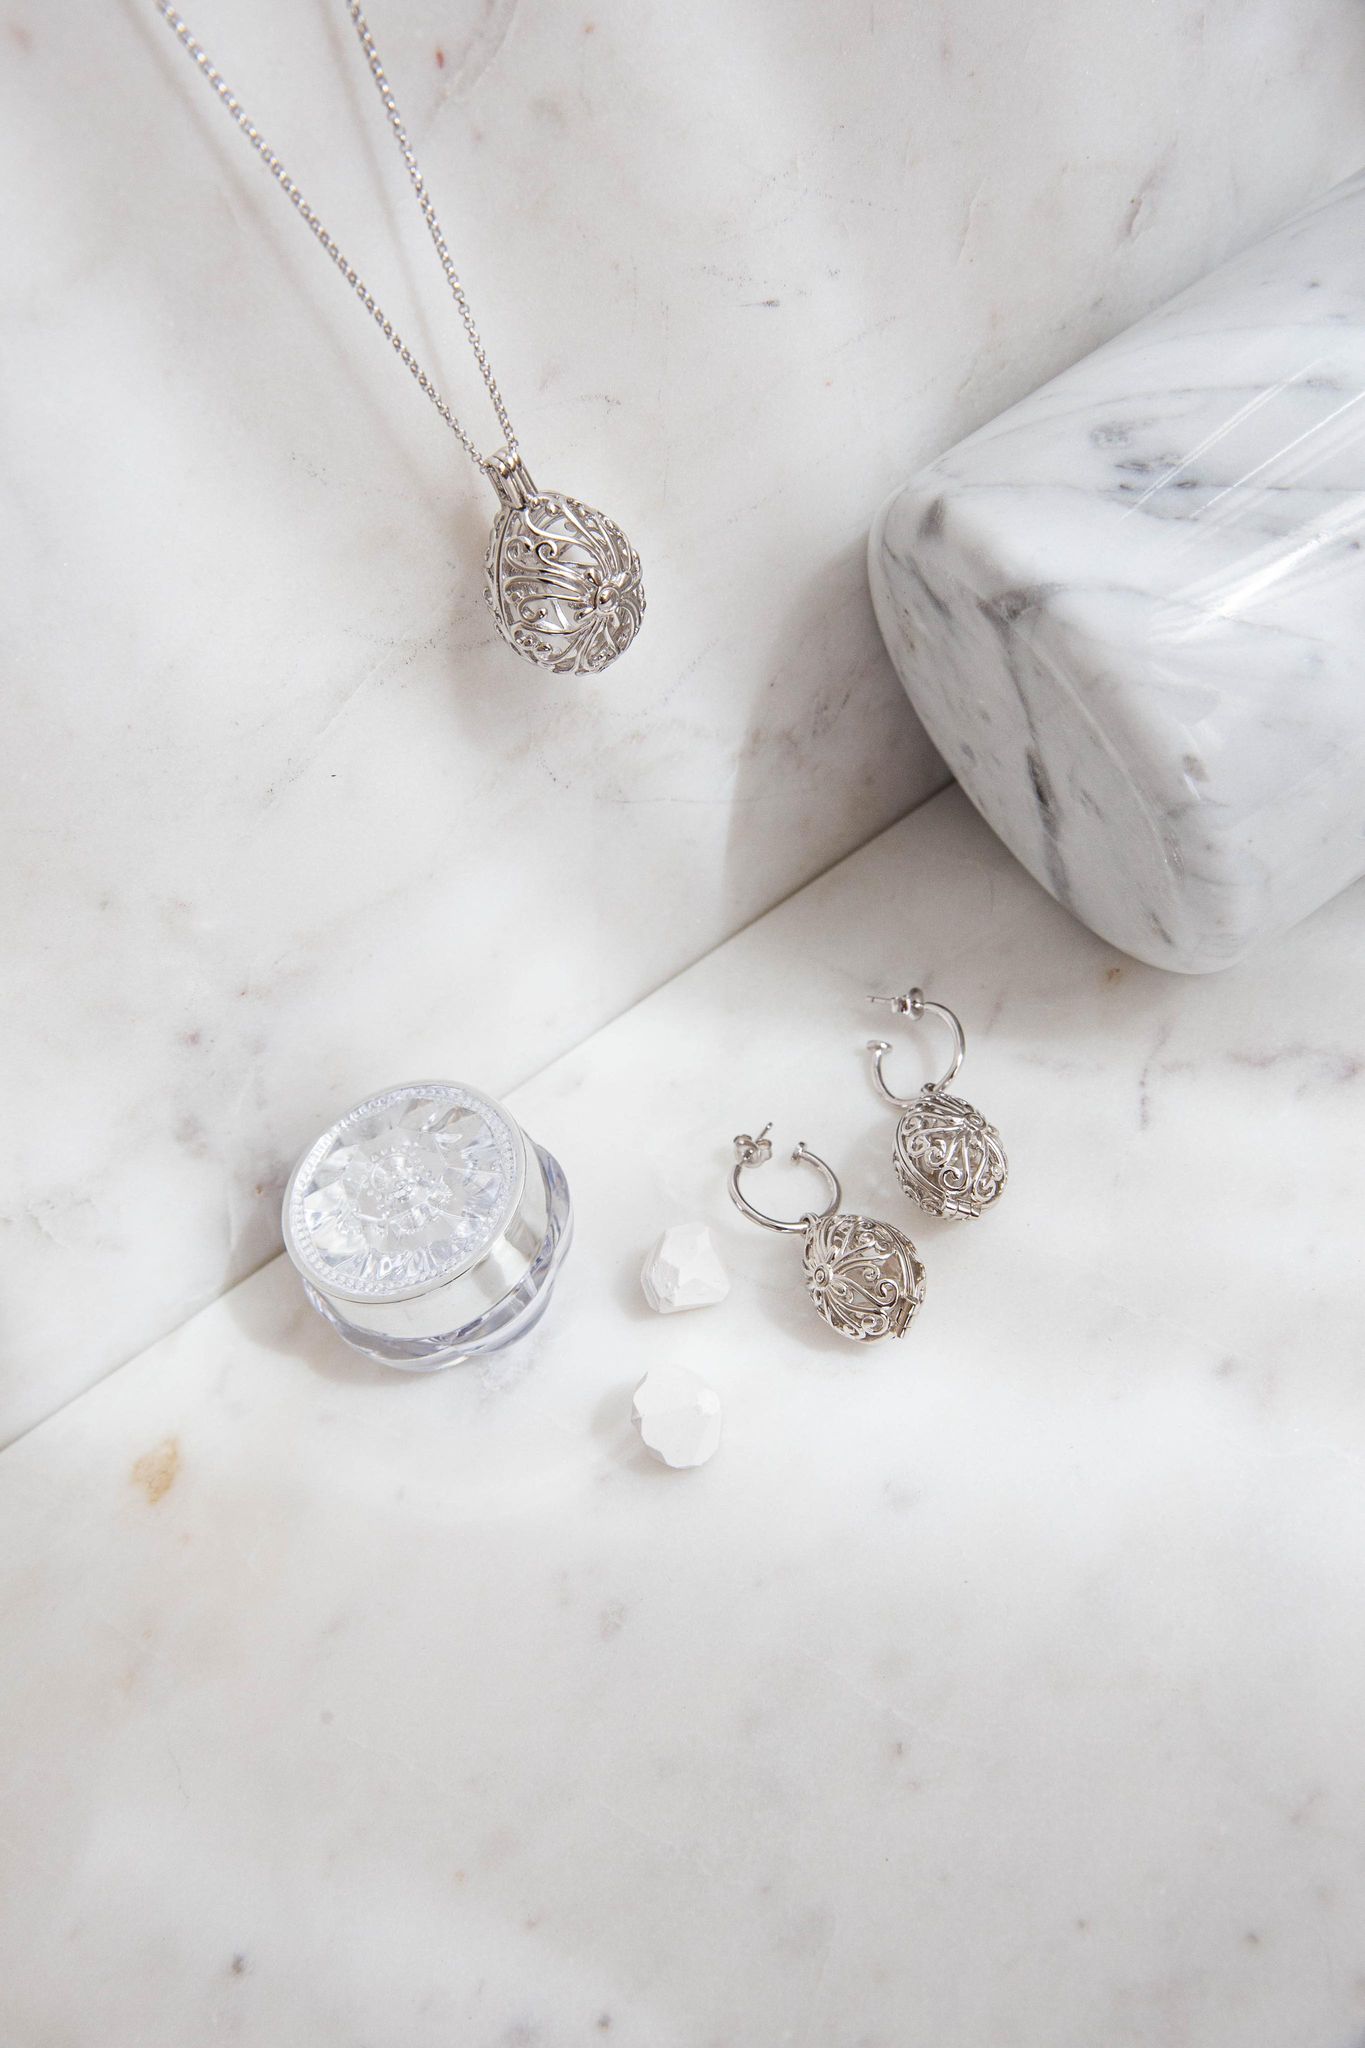 Tranquillity Silver Necklace and Earring Bundles